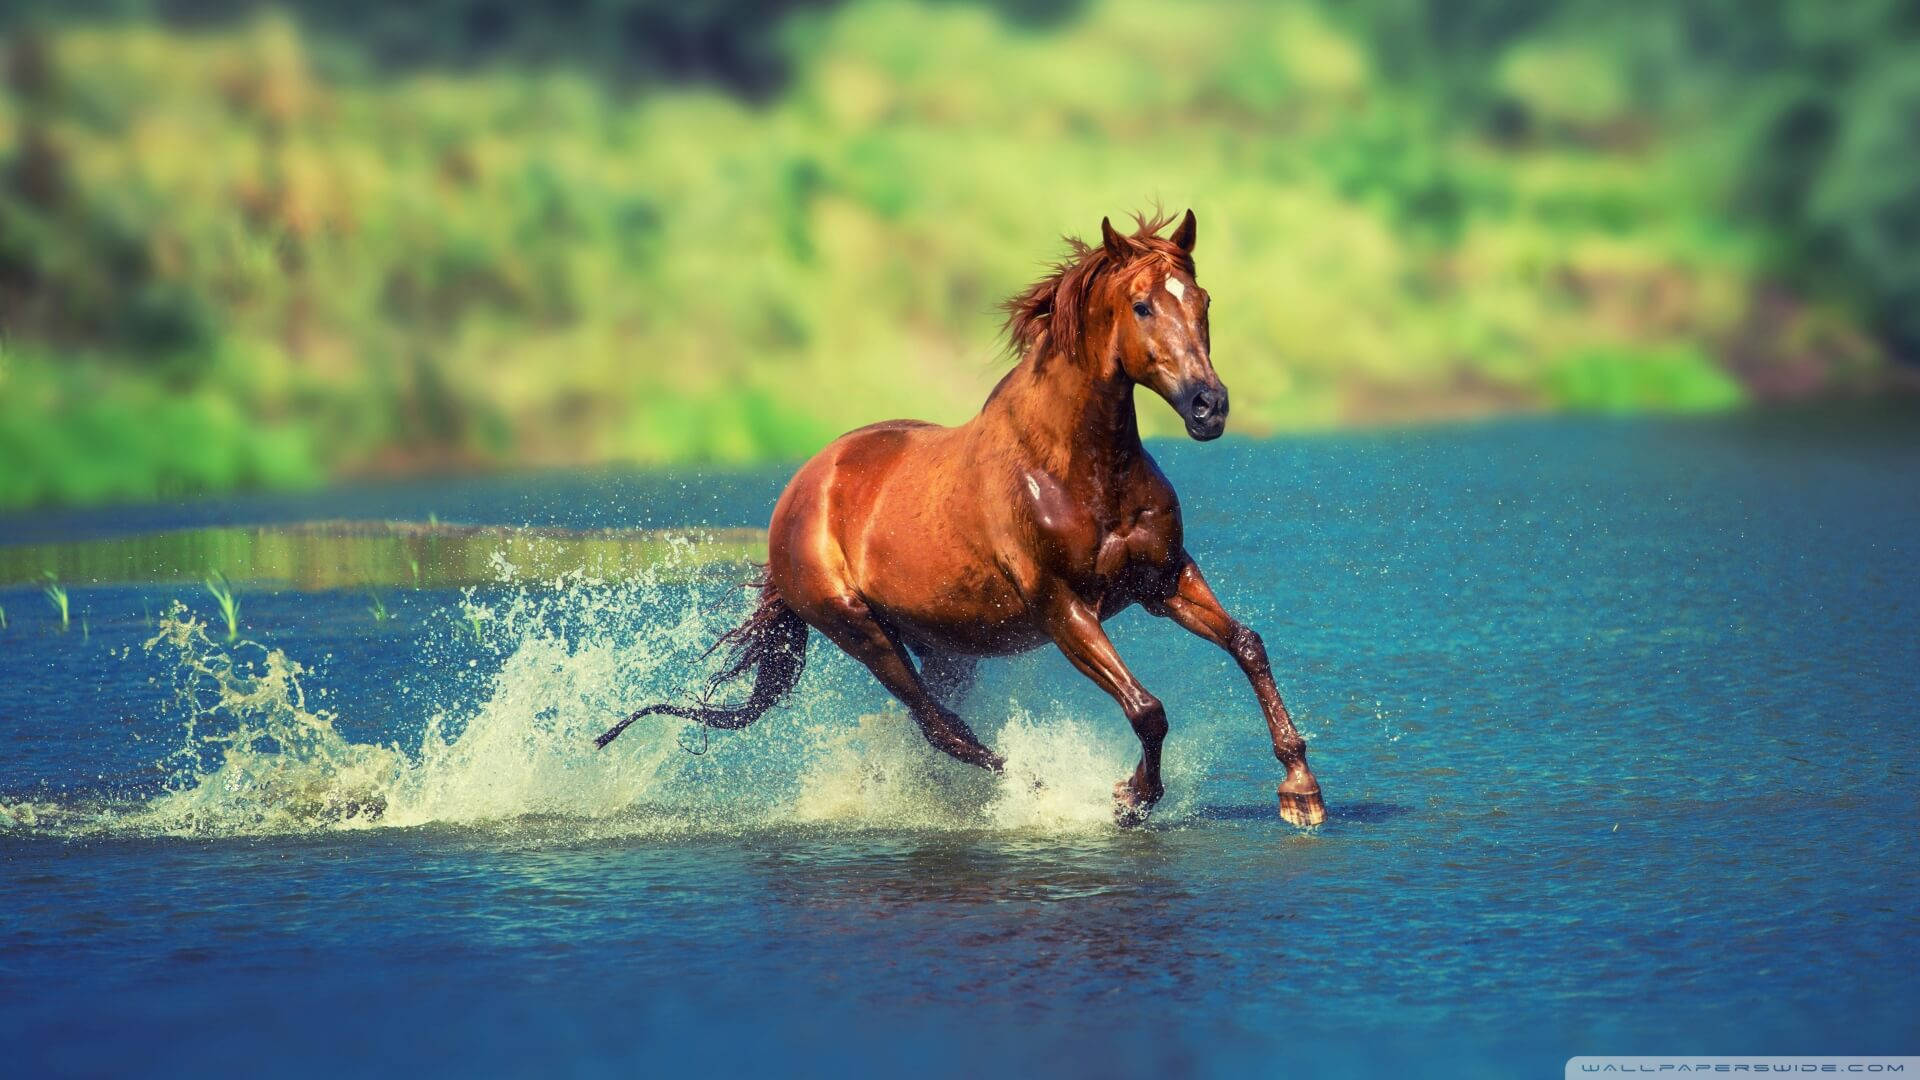 Chestnut Horse Galloping In Water